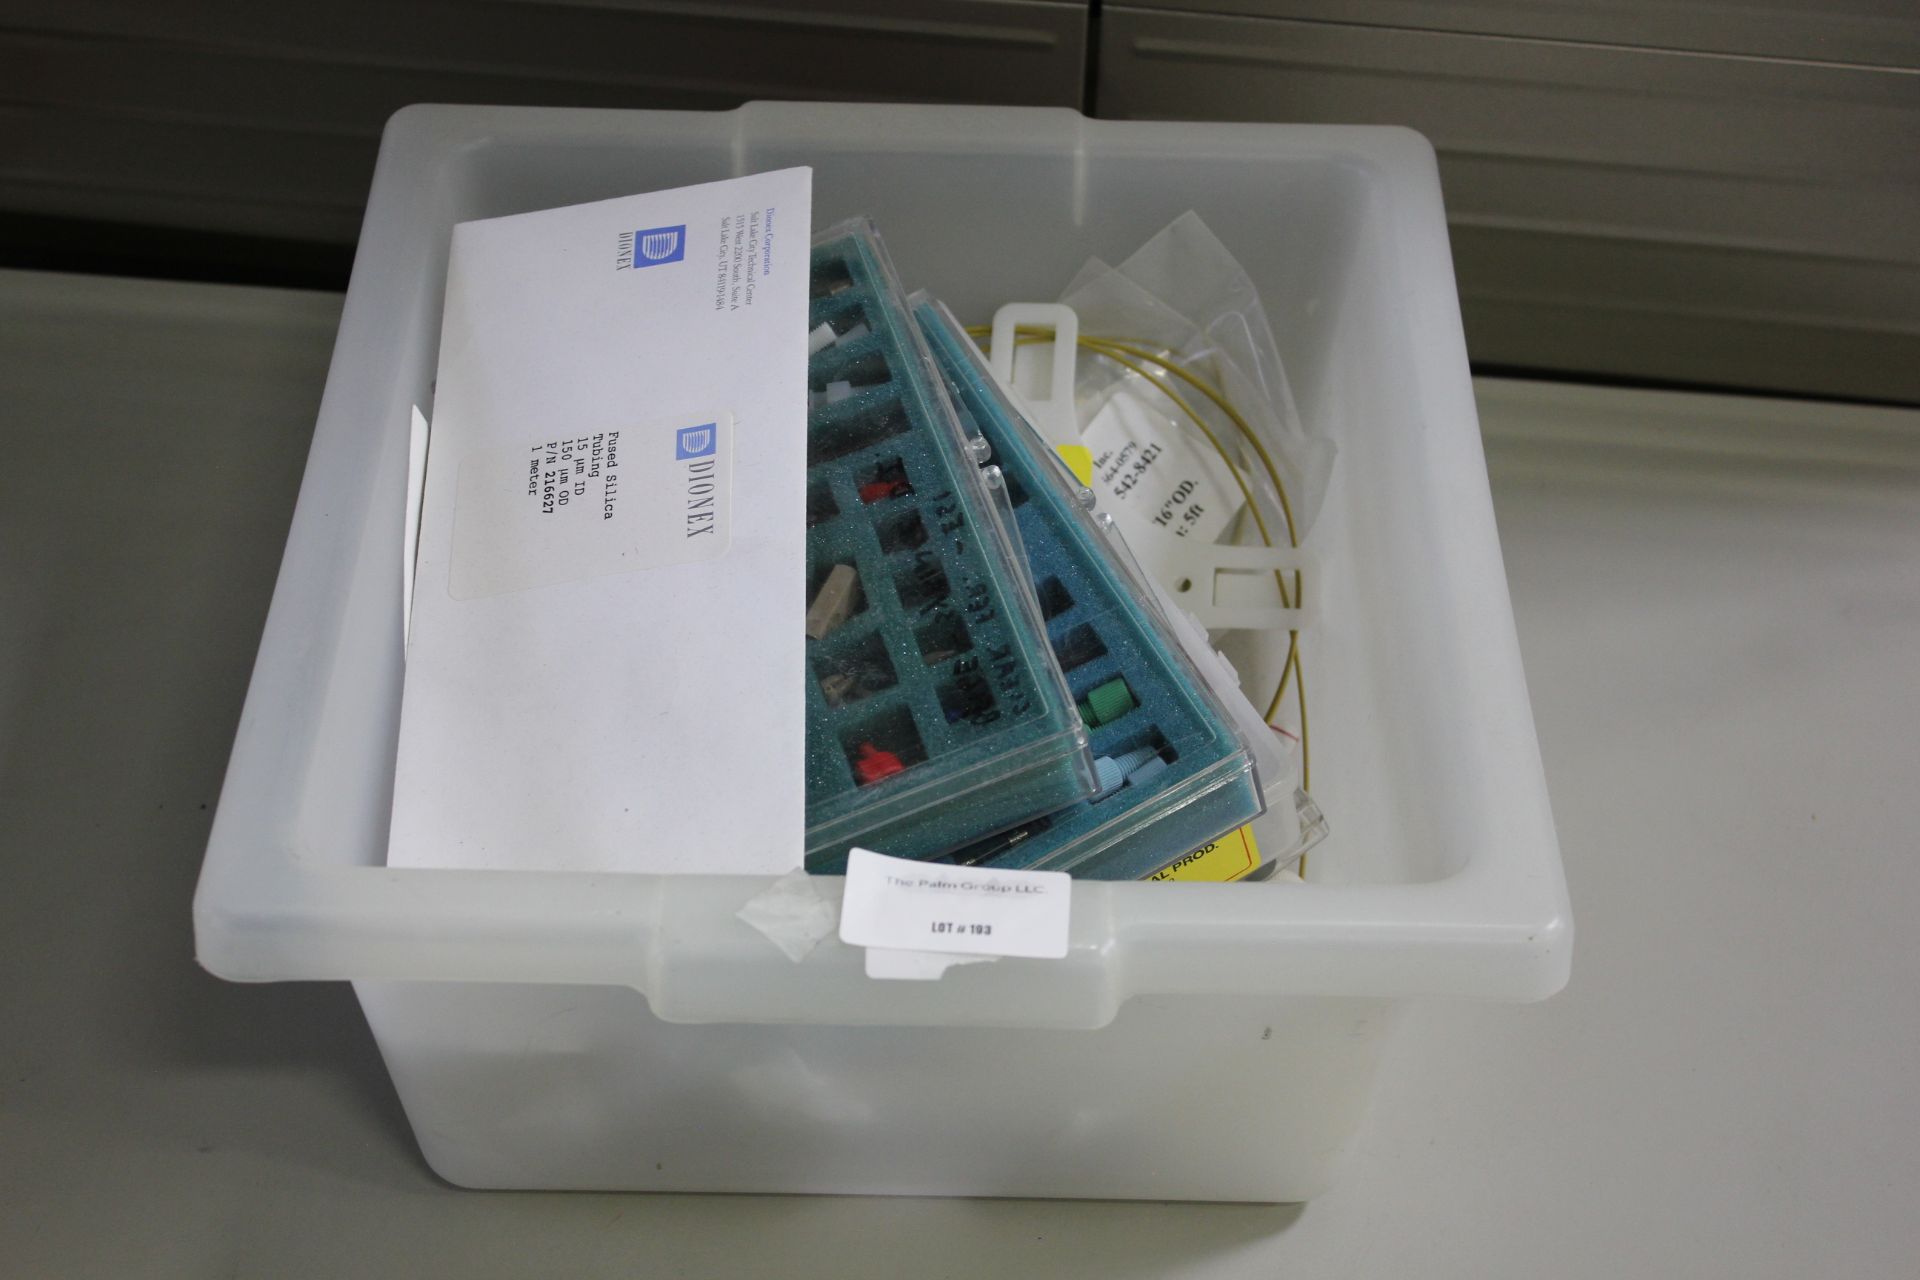 LOT OF HPLC PARTS - FITTINGS, TUBING, ETC